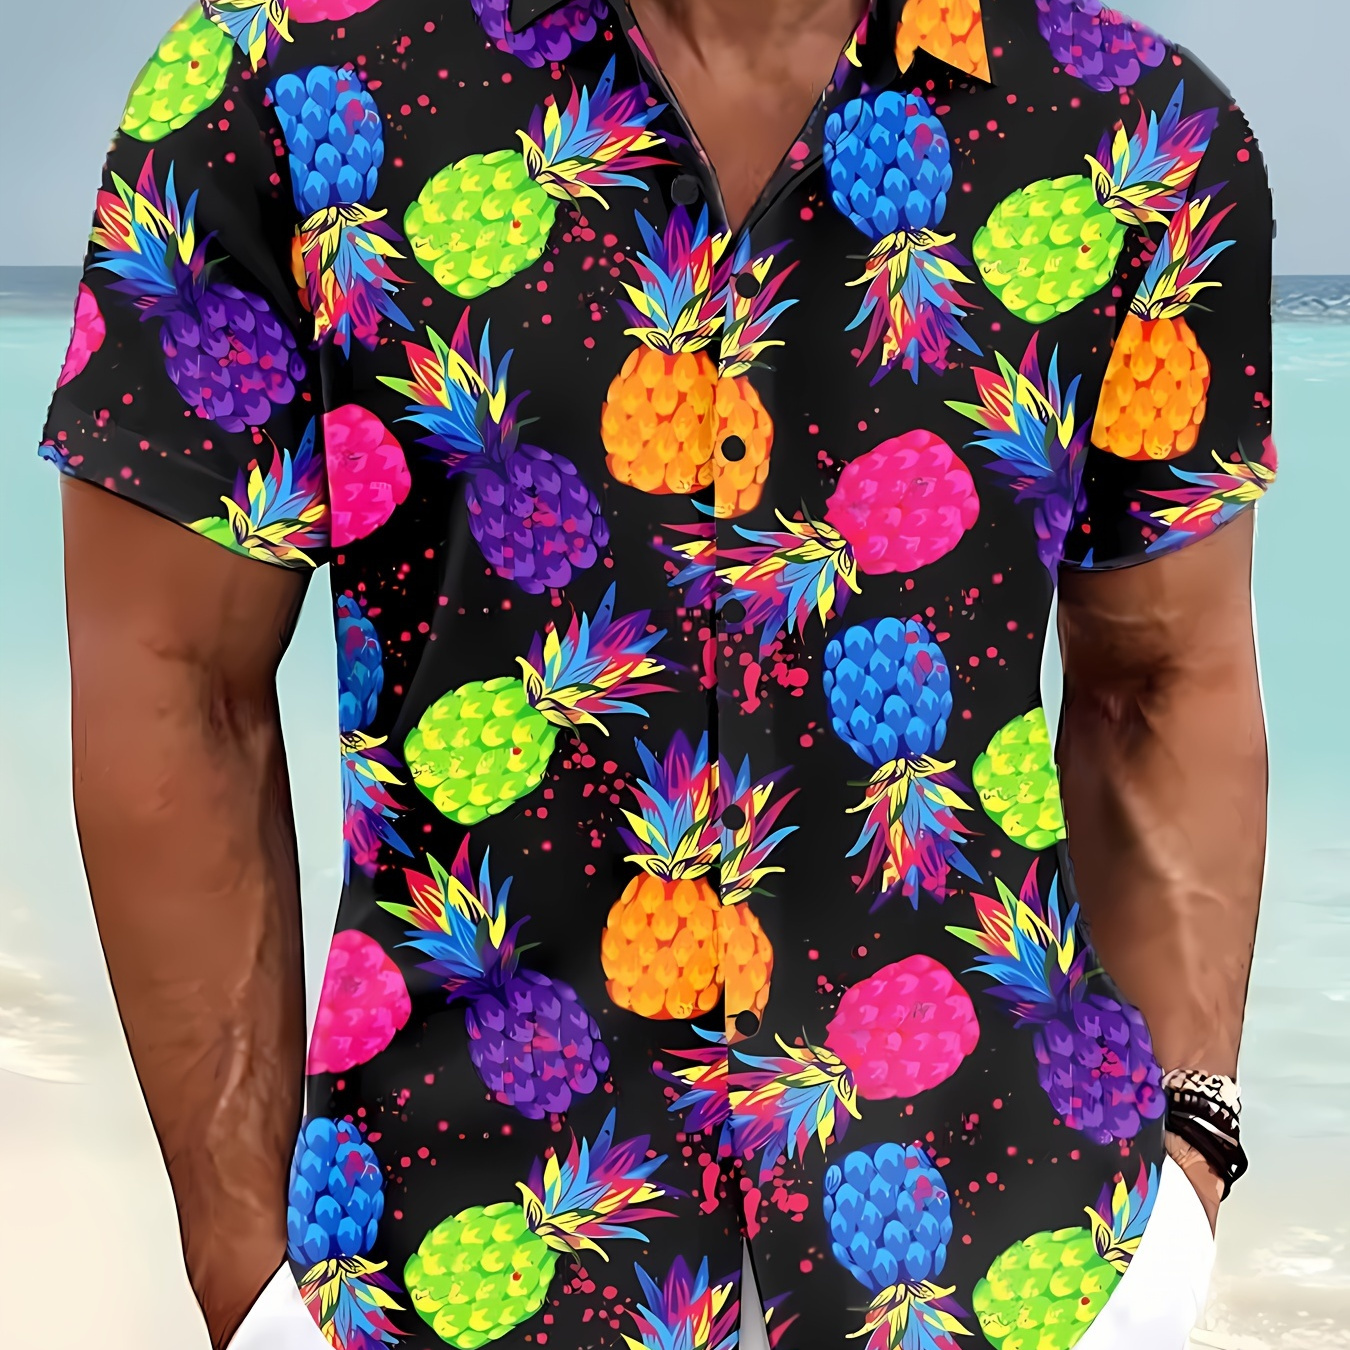 

Colorful Pineapple Pattern Men's Short Sleeve Button Up Lapel Shirt, Novel And Trendy Hawaiian Style Tops For Summer Beach Vacation Resorts